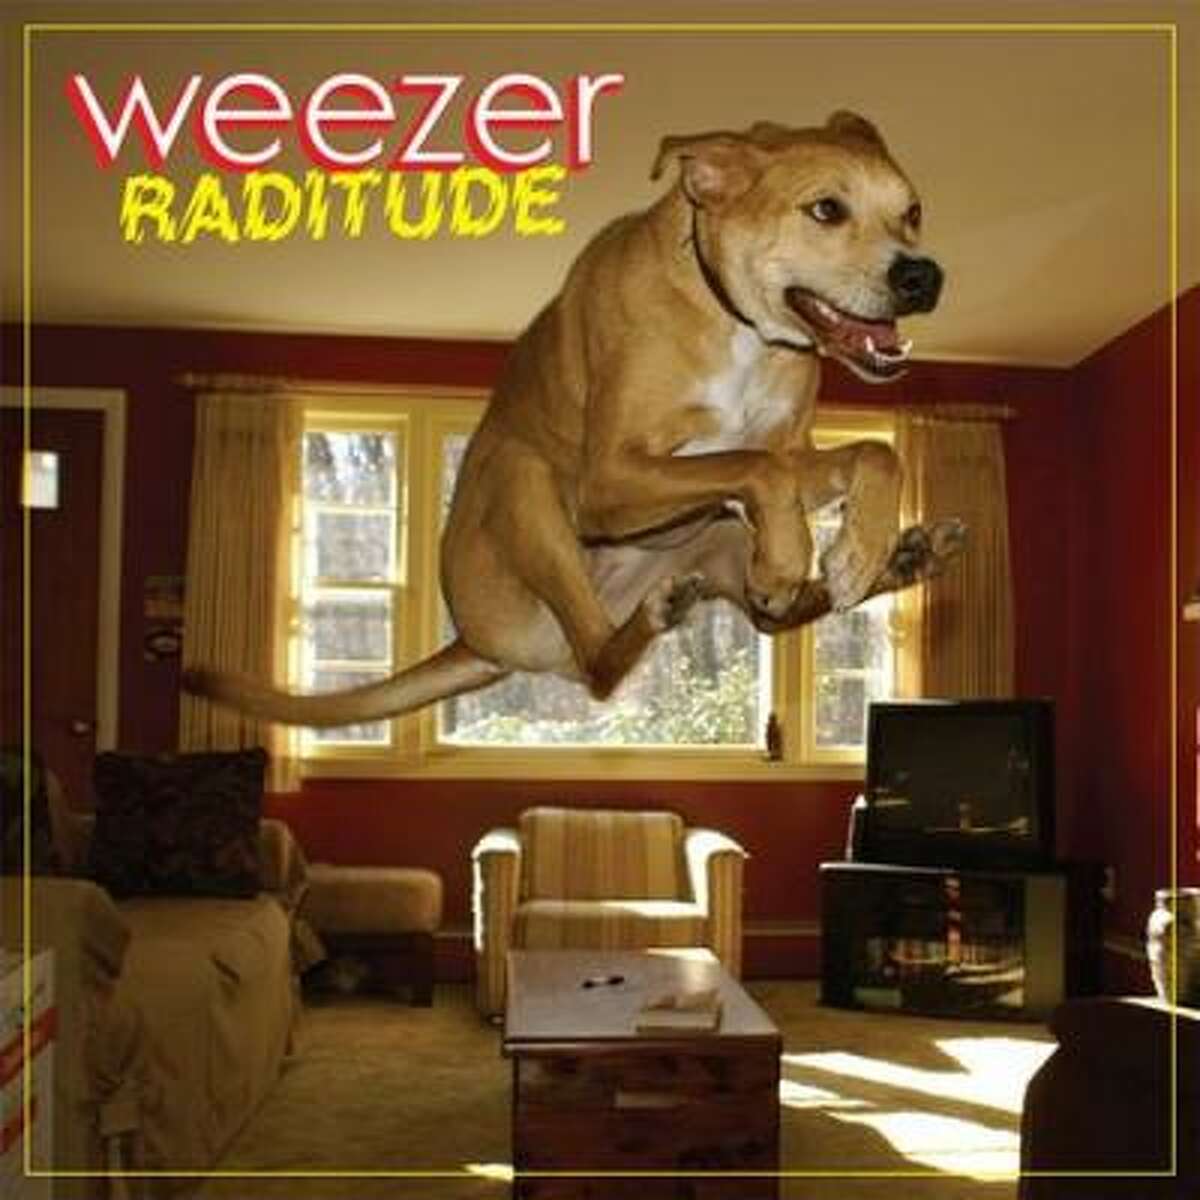 Weezer's album due in stores Oct. 27 features a photo of an amazing high-flying dog that a reader sent to National Geographic magazine. How does it rank with past album covers featuring dogs? Check out the following lineup. Is your favorite here?